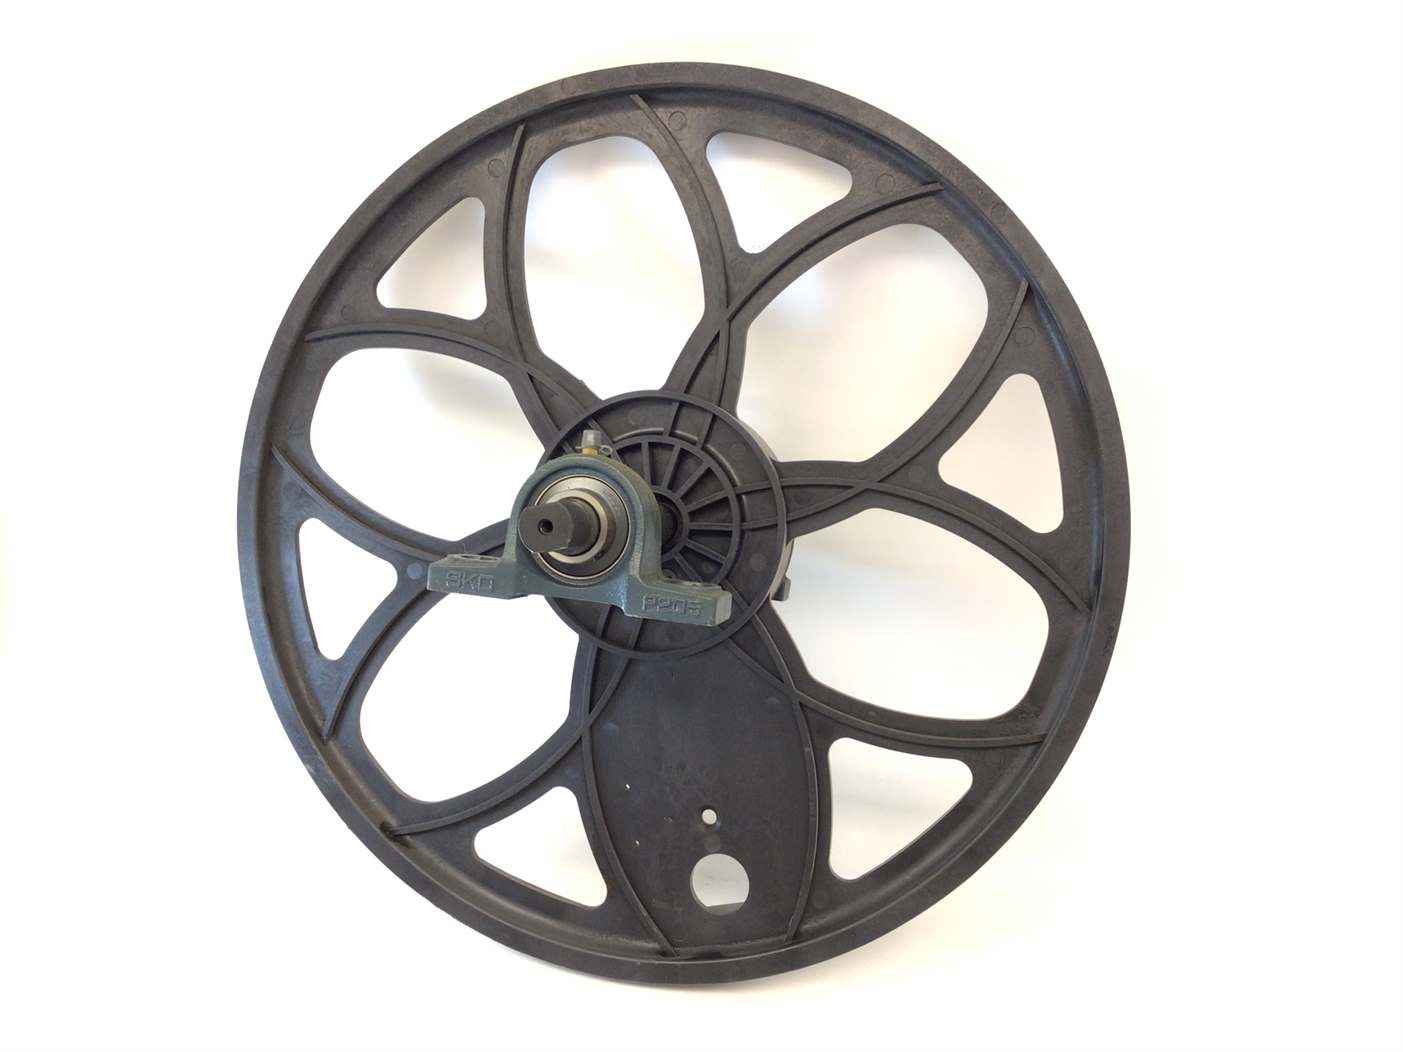 Drive Pulley with Axle and Bearings (Used)